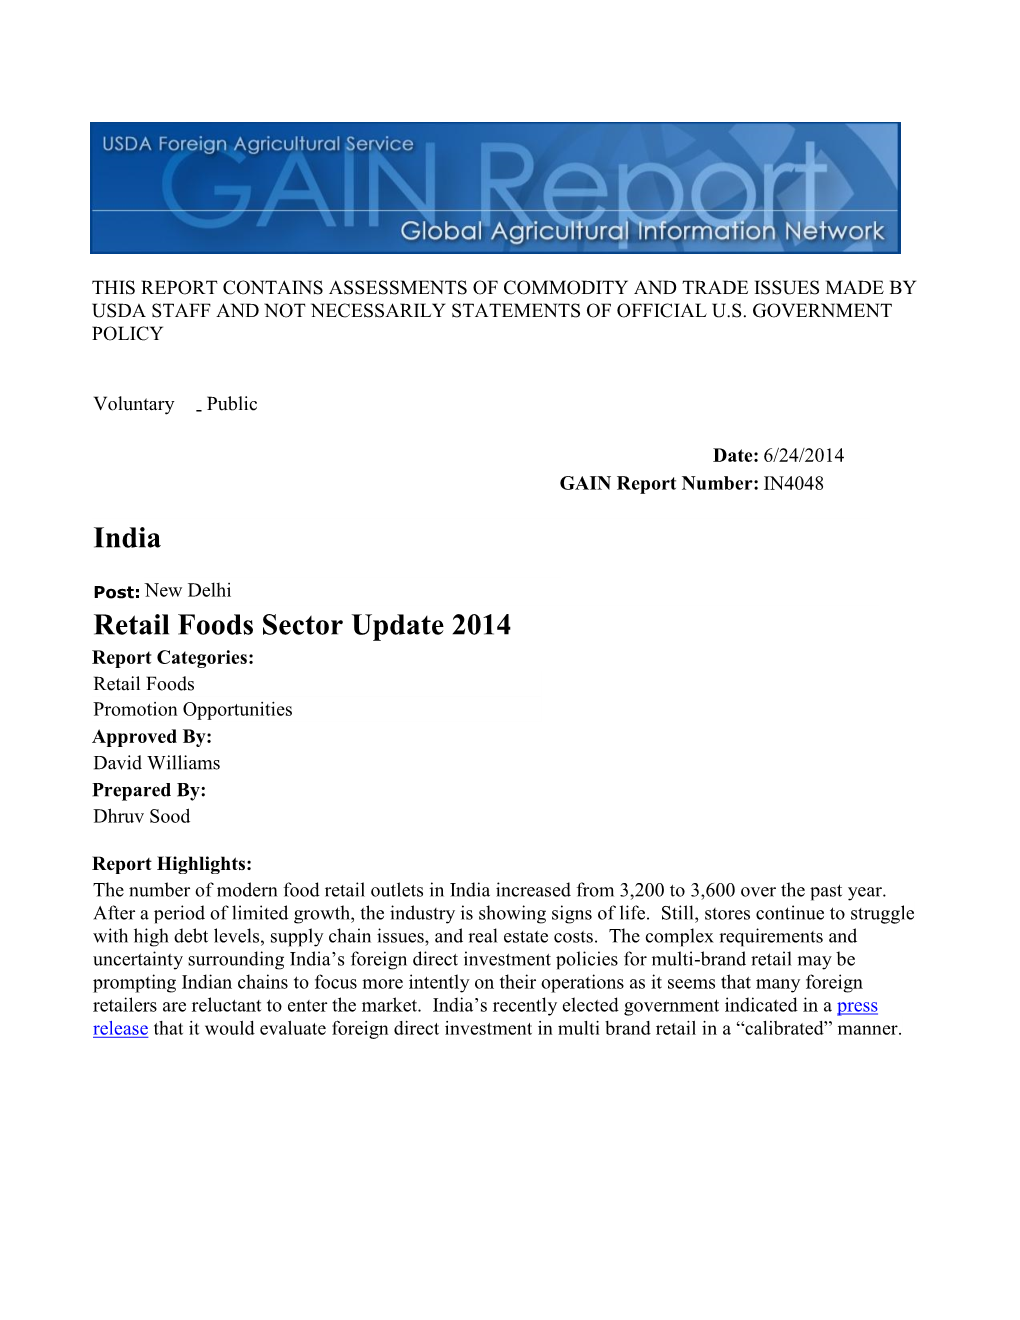 Retail Foods Sector Update 2014 India